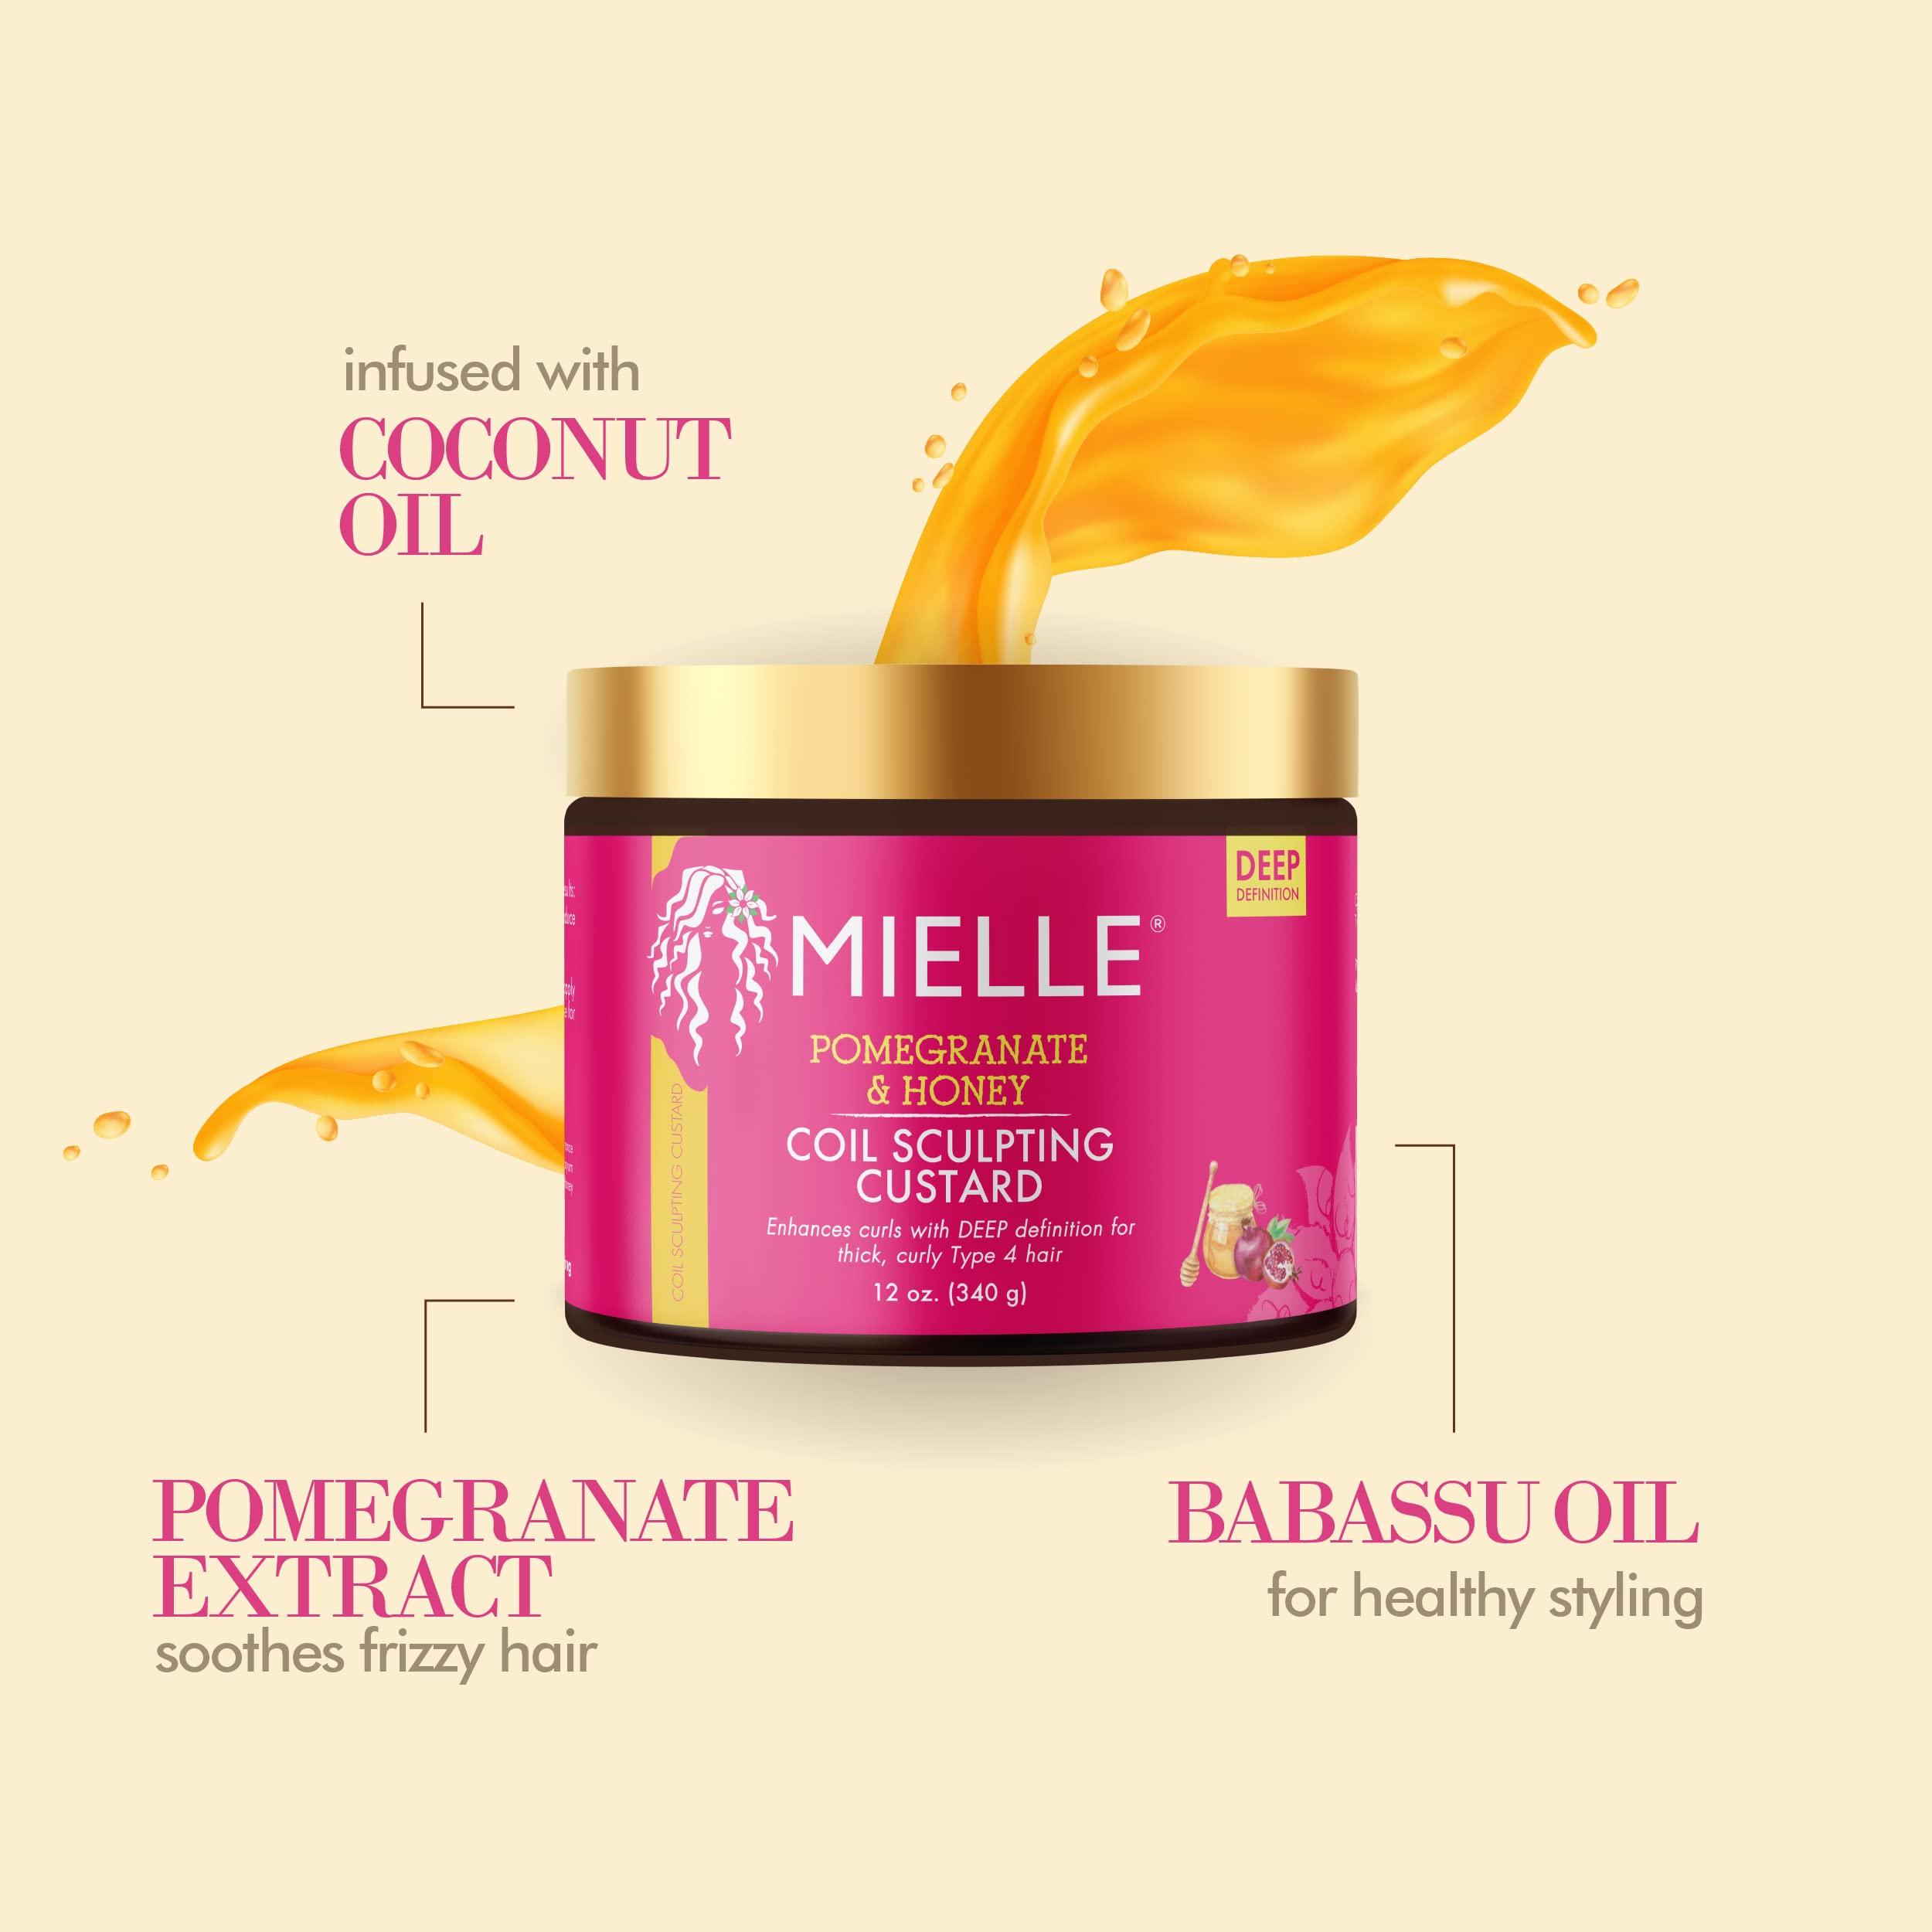 Mua Mielle Organics Pomegranate & Honey Sculpting Custard, Natural Styling  Cream Plus Moisture, For Curl, Wave, & Coil Definition, Treatment For  Natural or Relaxed Type 4 Hair, 12-Fluid Ounces trên Amazon Mỹ